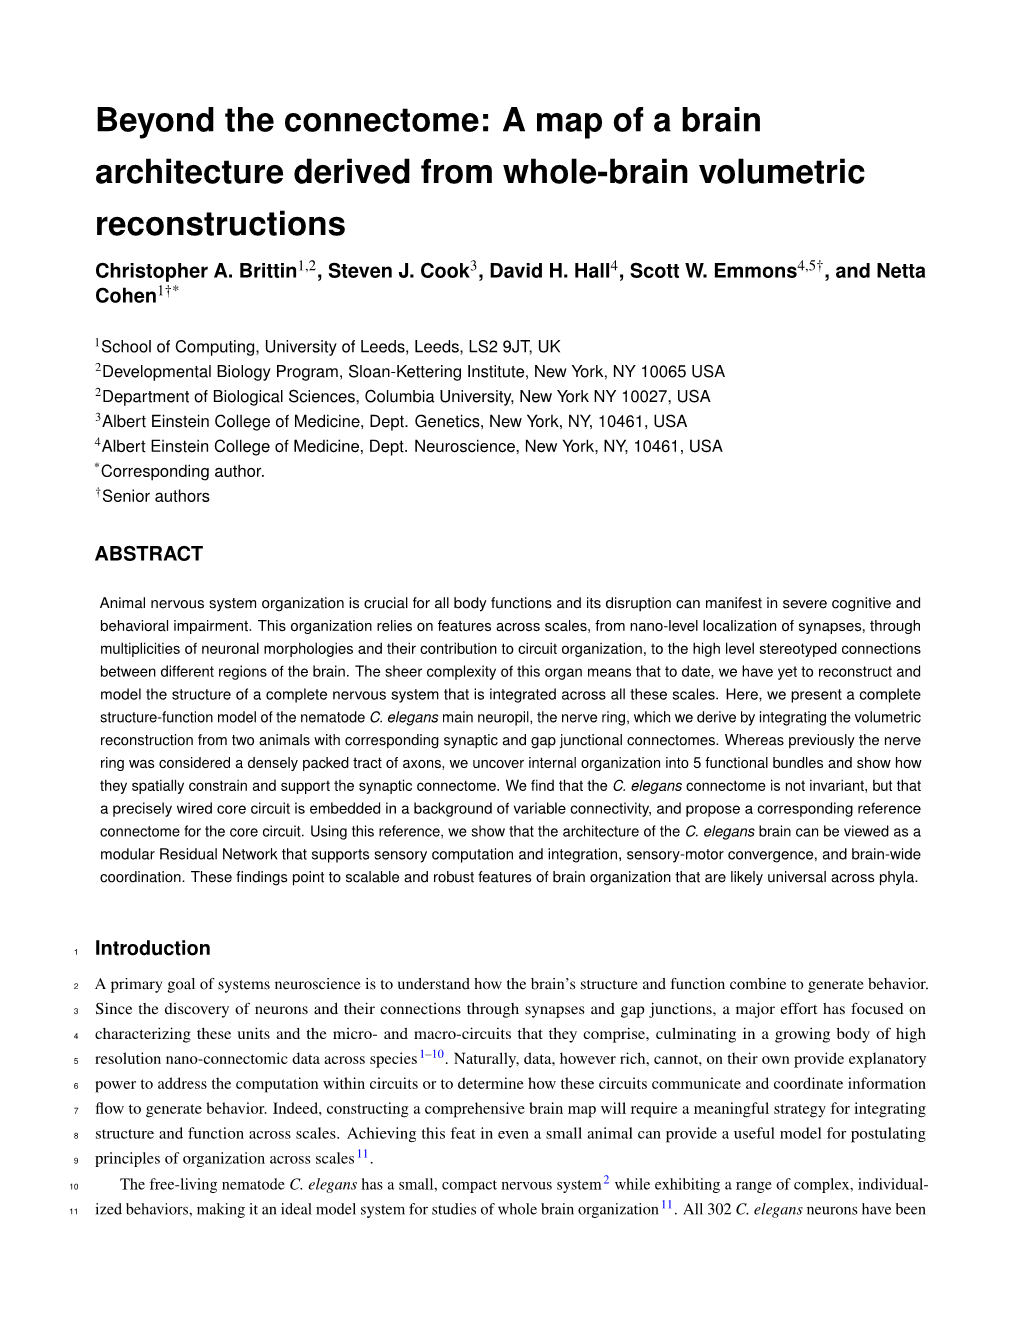 Beyond the Connectome: a Map of a Brain Architecture Derived from Whole-Brain Volumetric Reconstructions Christopher A